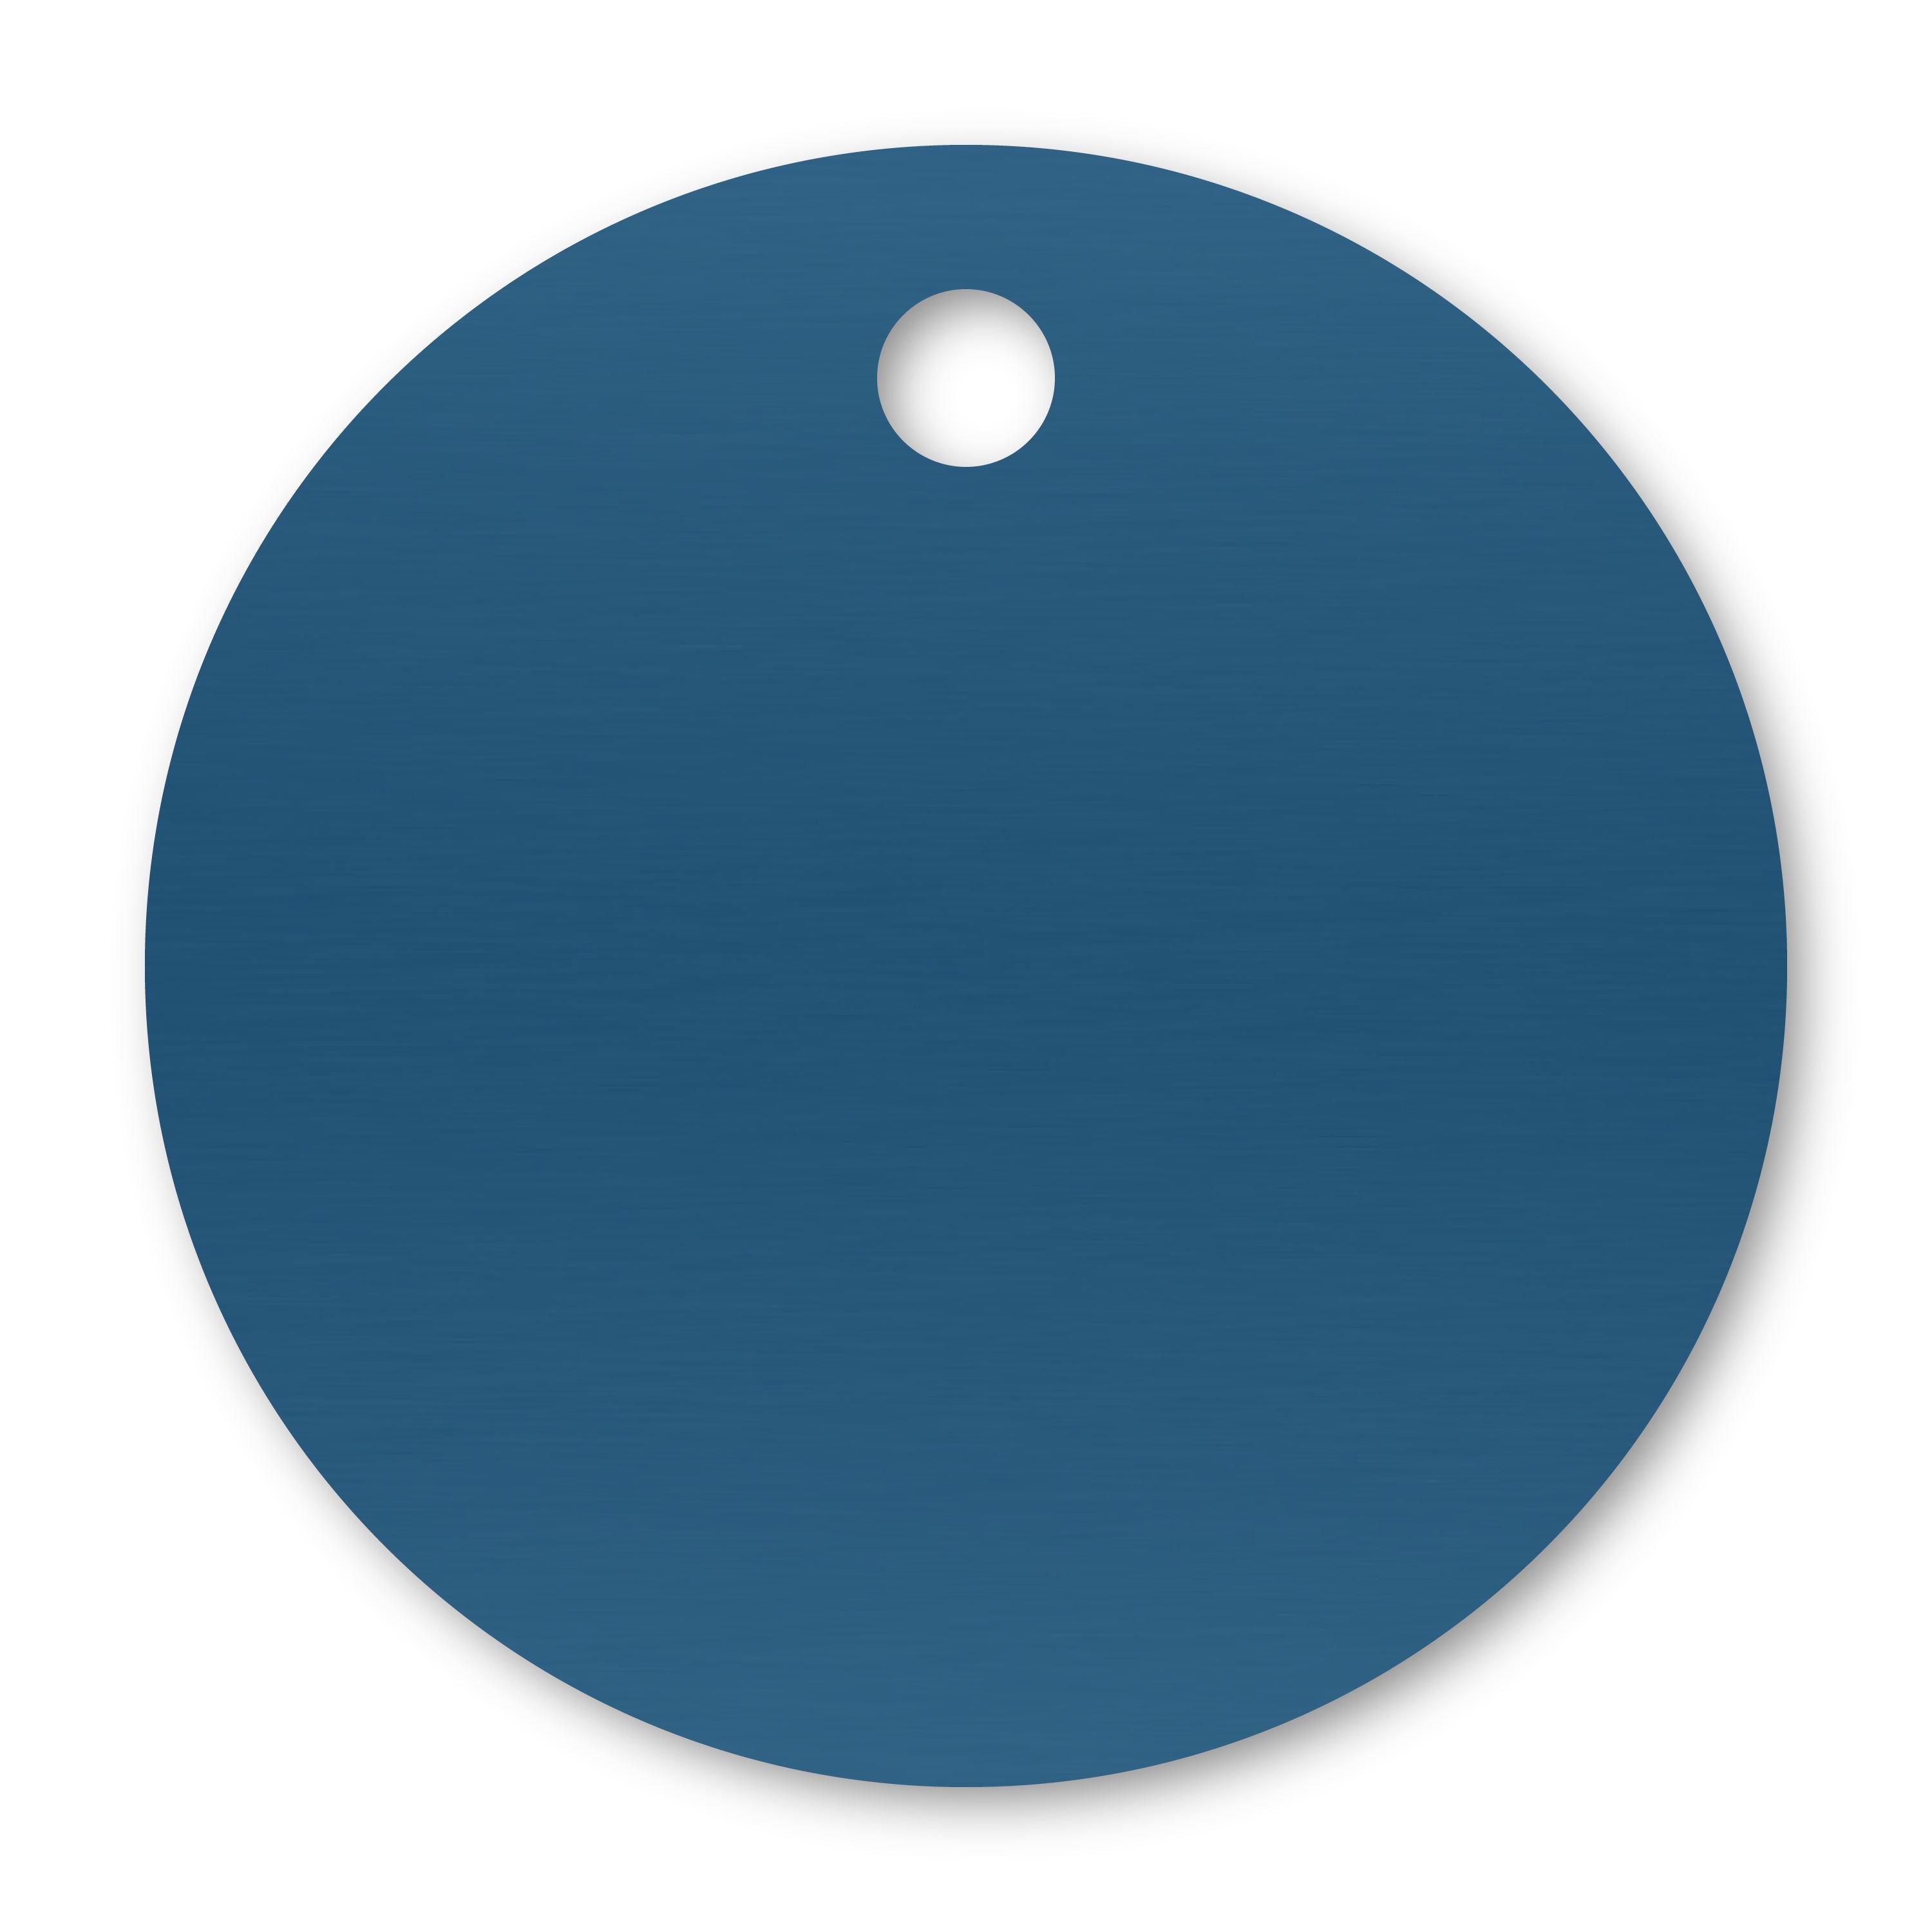 Anodized Aluminum Round Tags, 1-1/4" with 1/8" Hole, Laser Engraved Metal Tags Craftworks NW Blue 